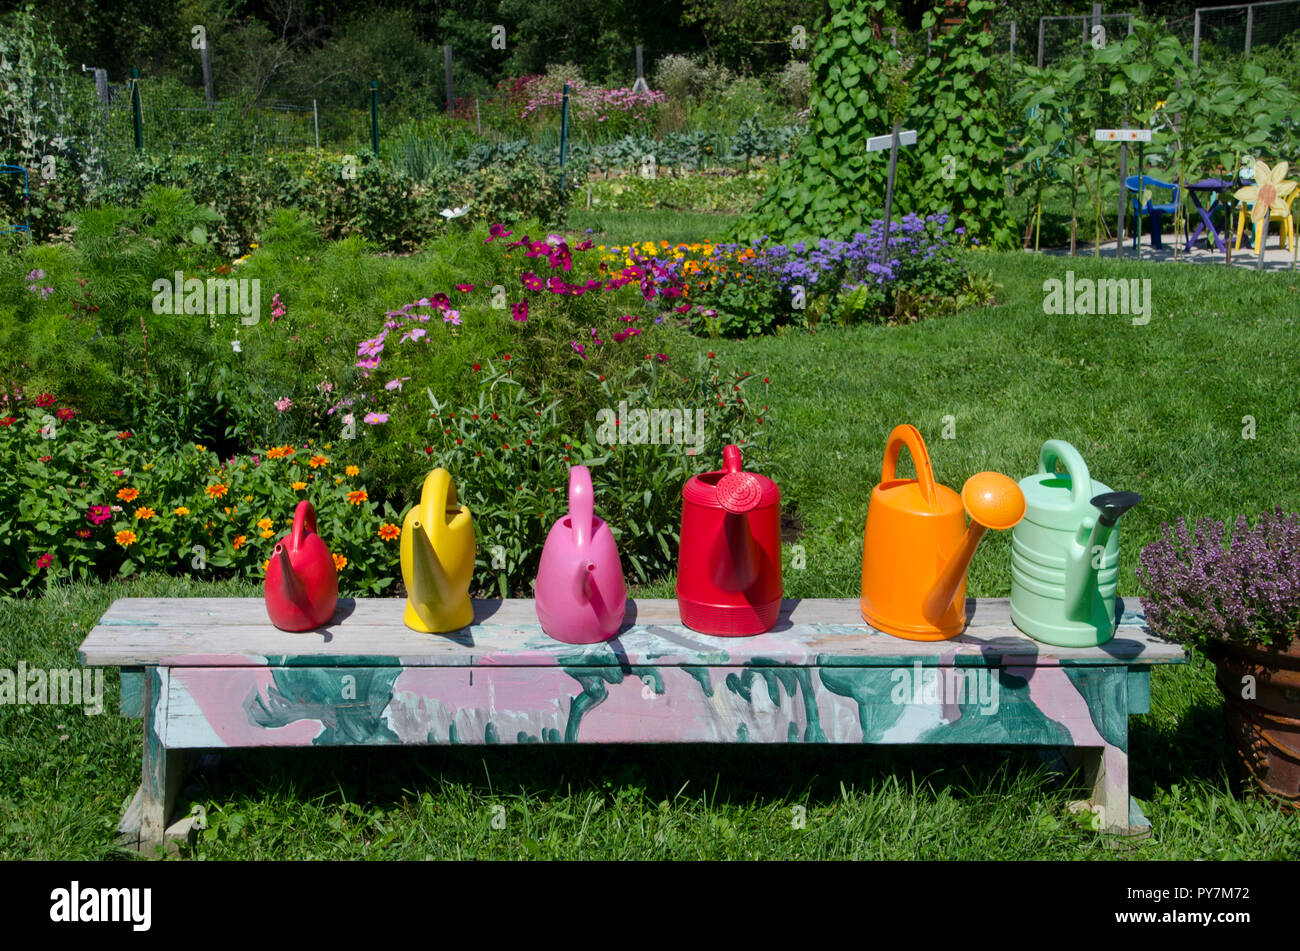 Row of colorful watering cans on painted bench in garden, Community Garden, Maine, USA Stock Photo